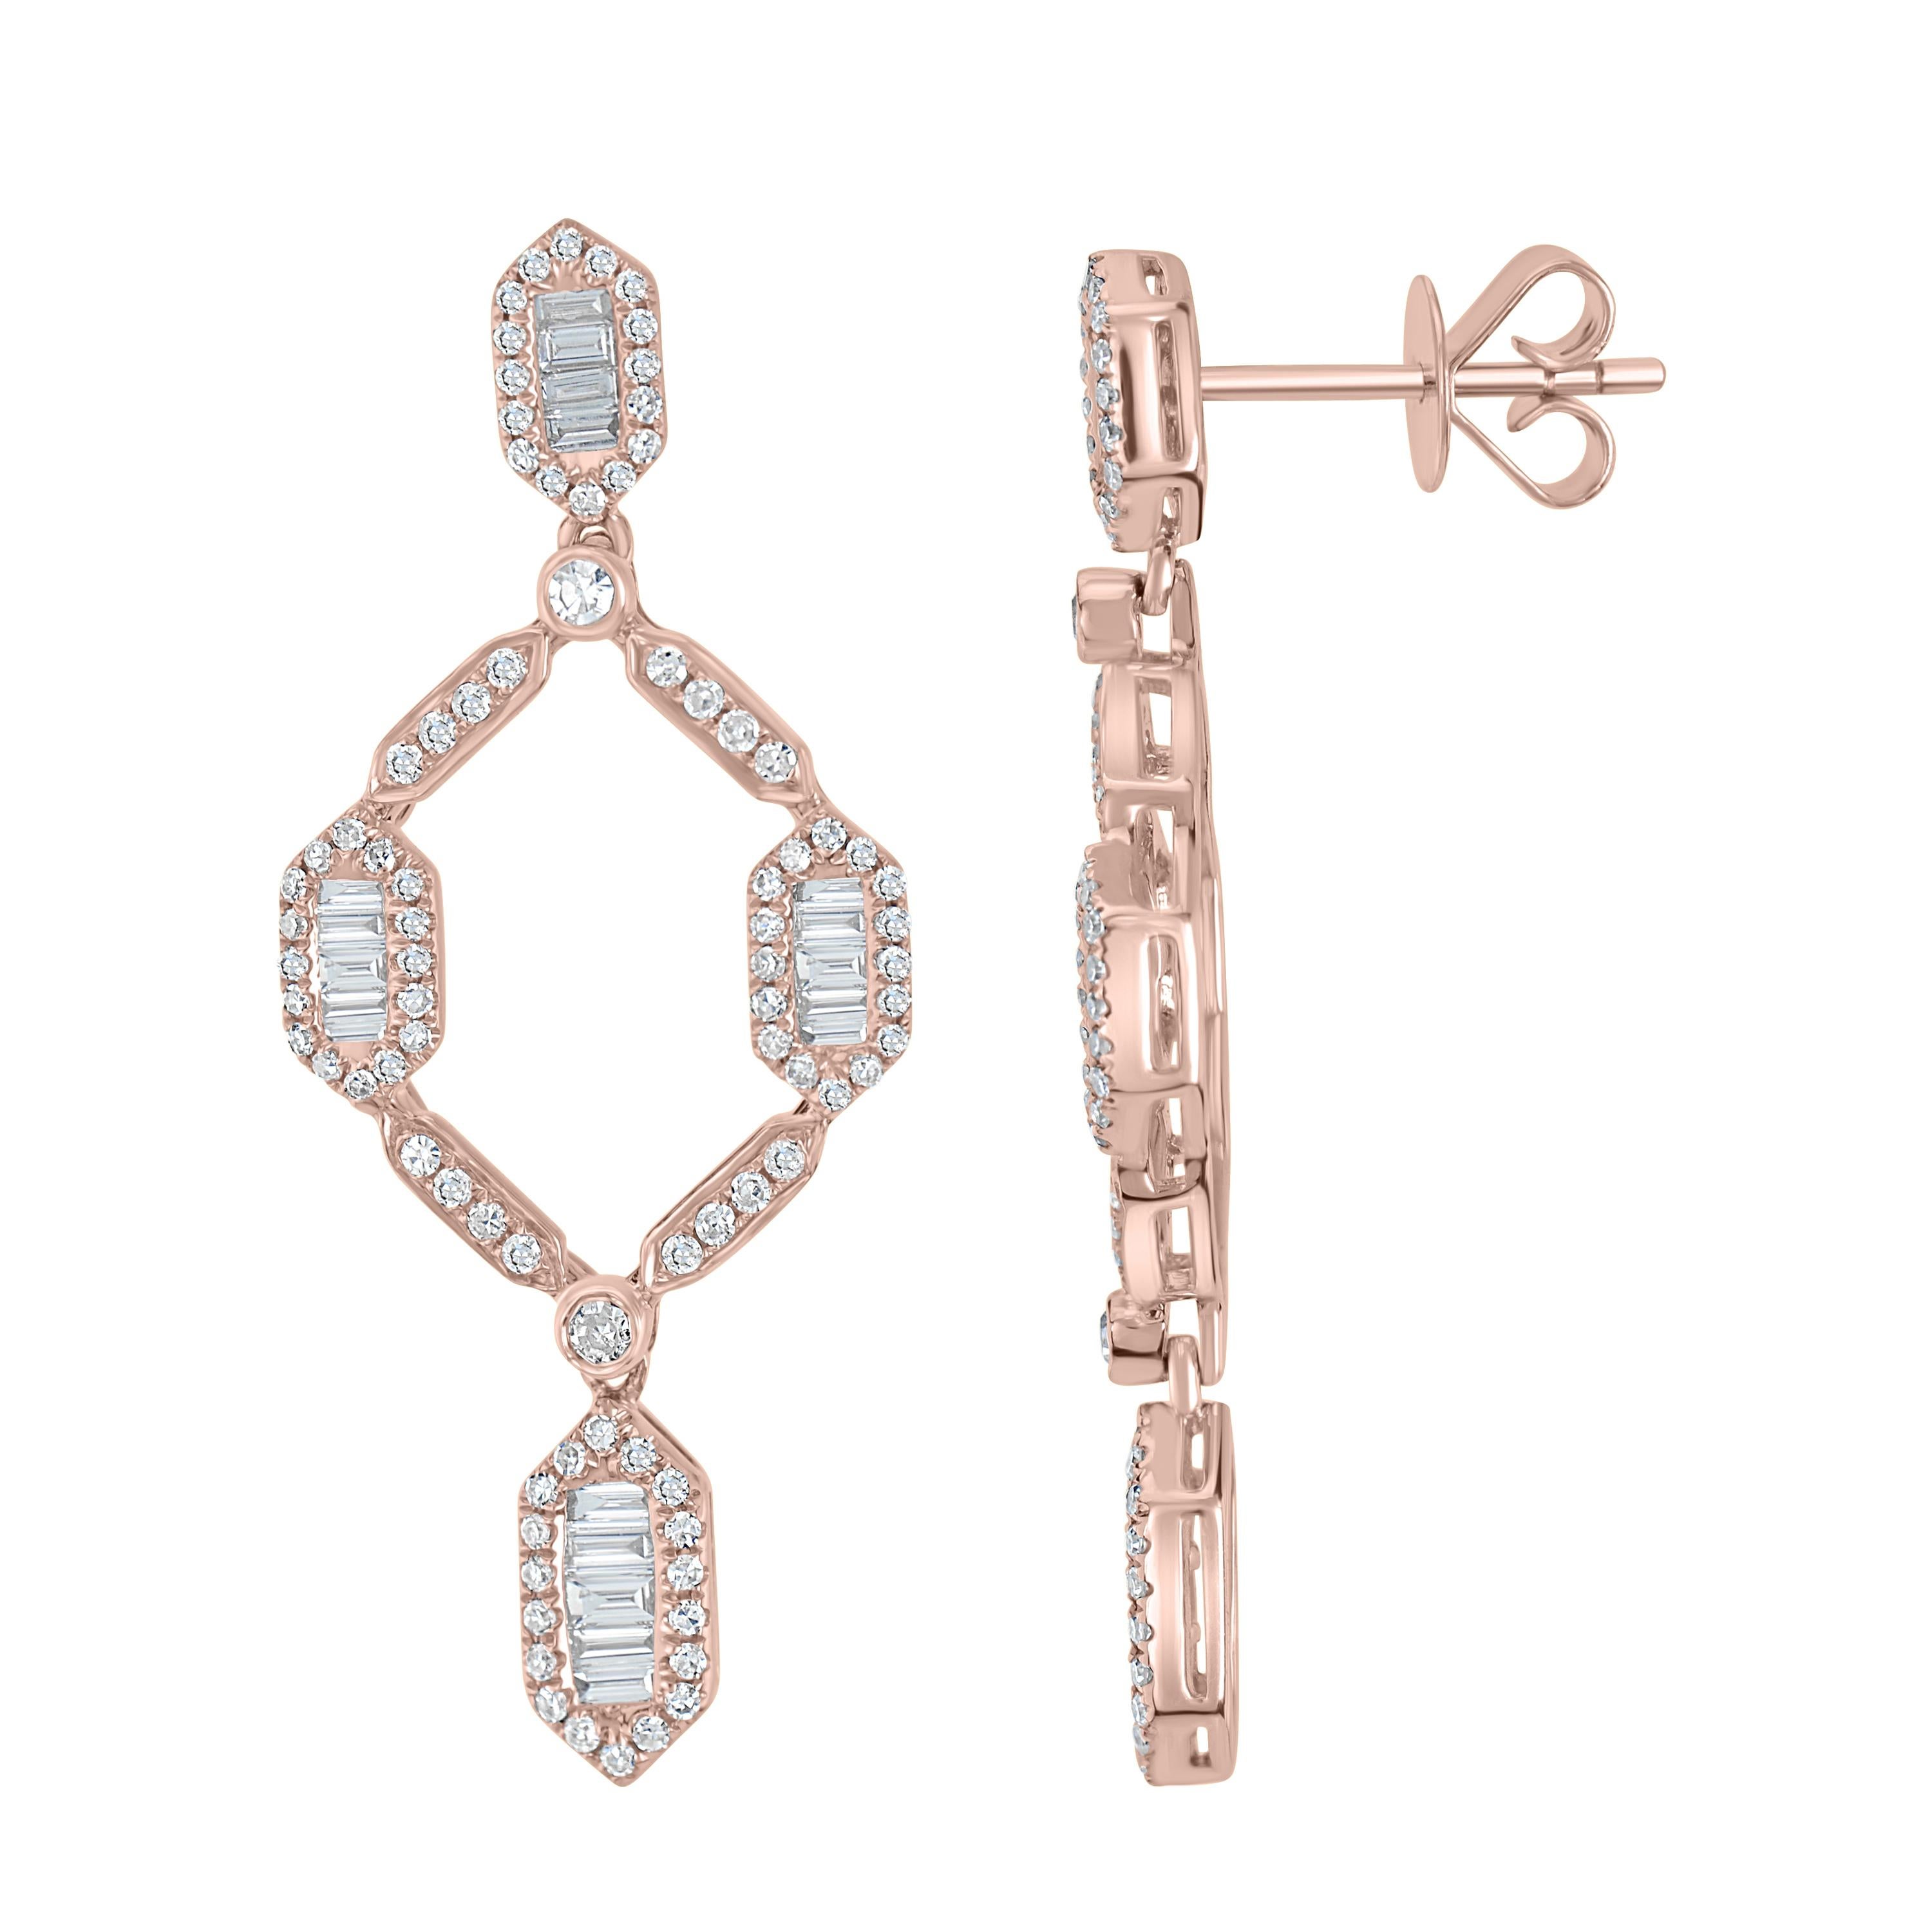 These Luxle Drop earrings are featured with smaller and larger diamonds embellished in an open frame design. Each pair consists of 44 baguette diamonds and 196 round diamonds on pave. These earrings come with gold posts and push-backs.

Please